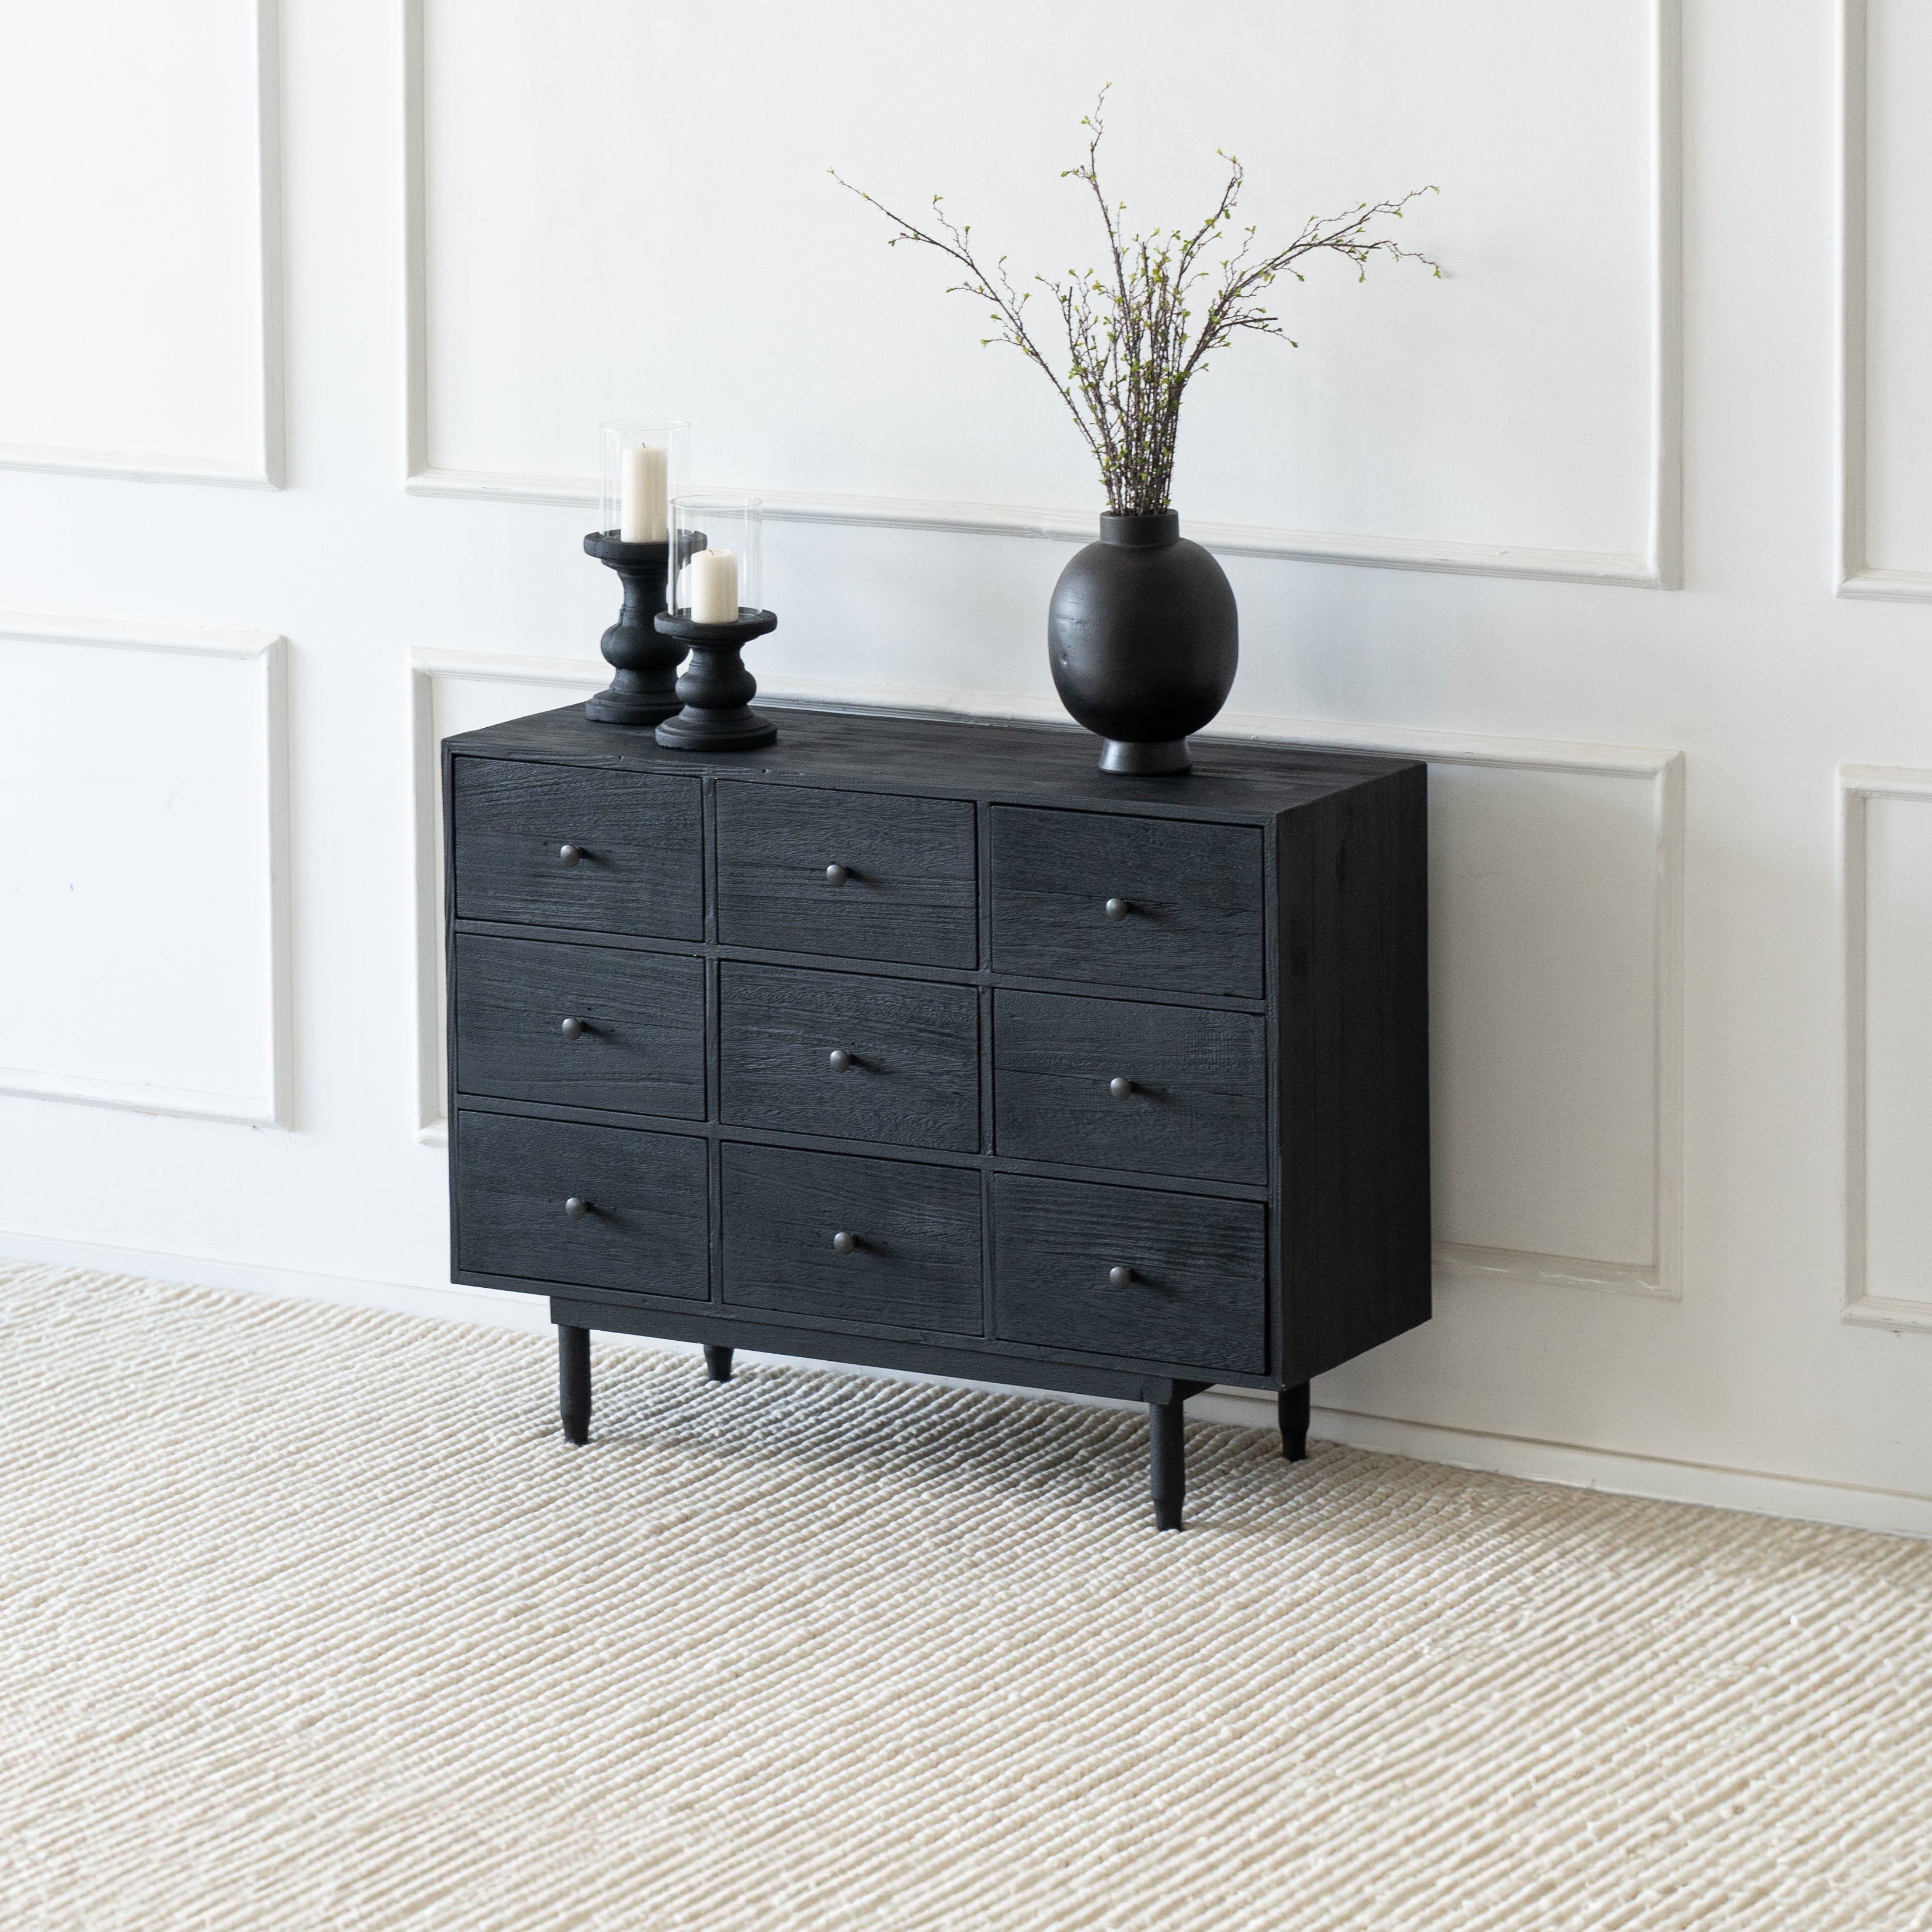 Tokyo Wooden Chest Of Drawers / Storage Cabinet  - WS Living - UAE - Cabinets Wood and steel Furnitures - Dubai